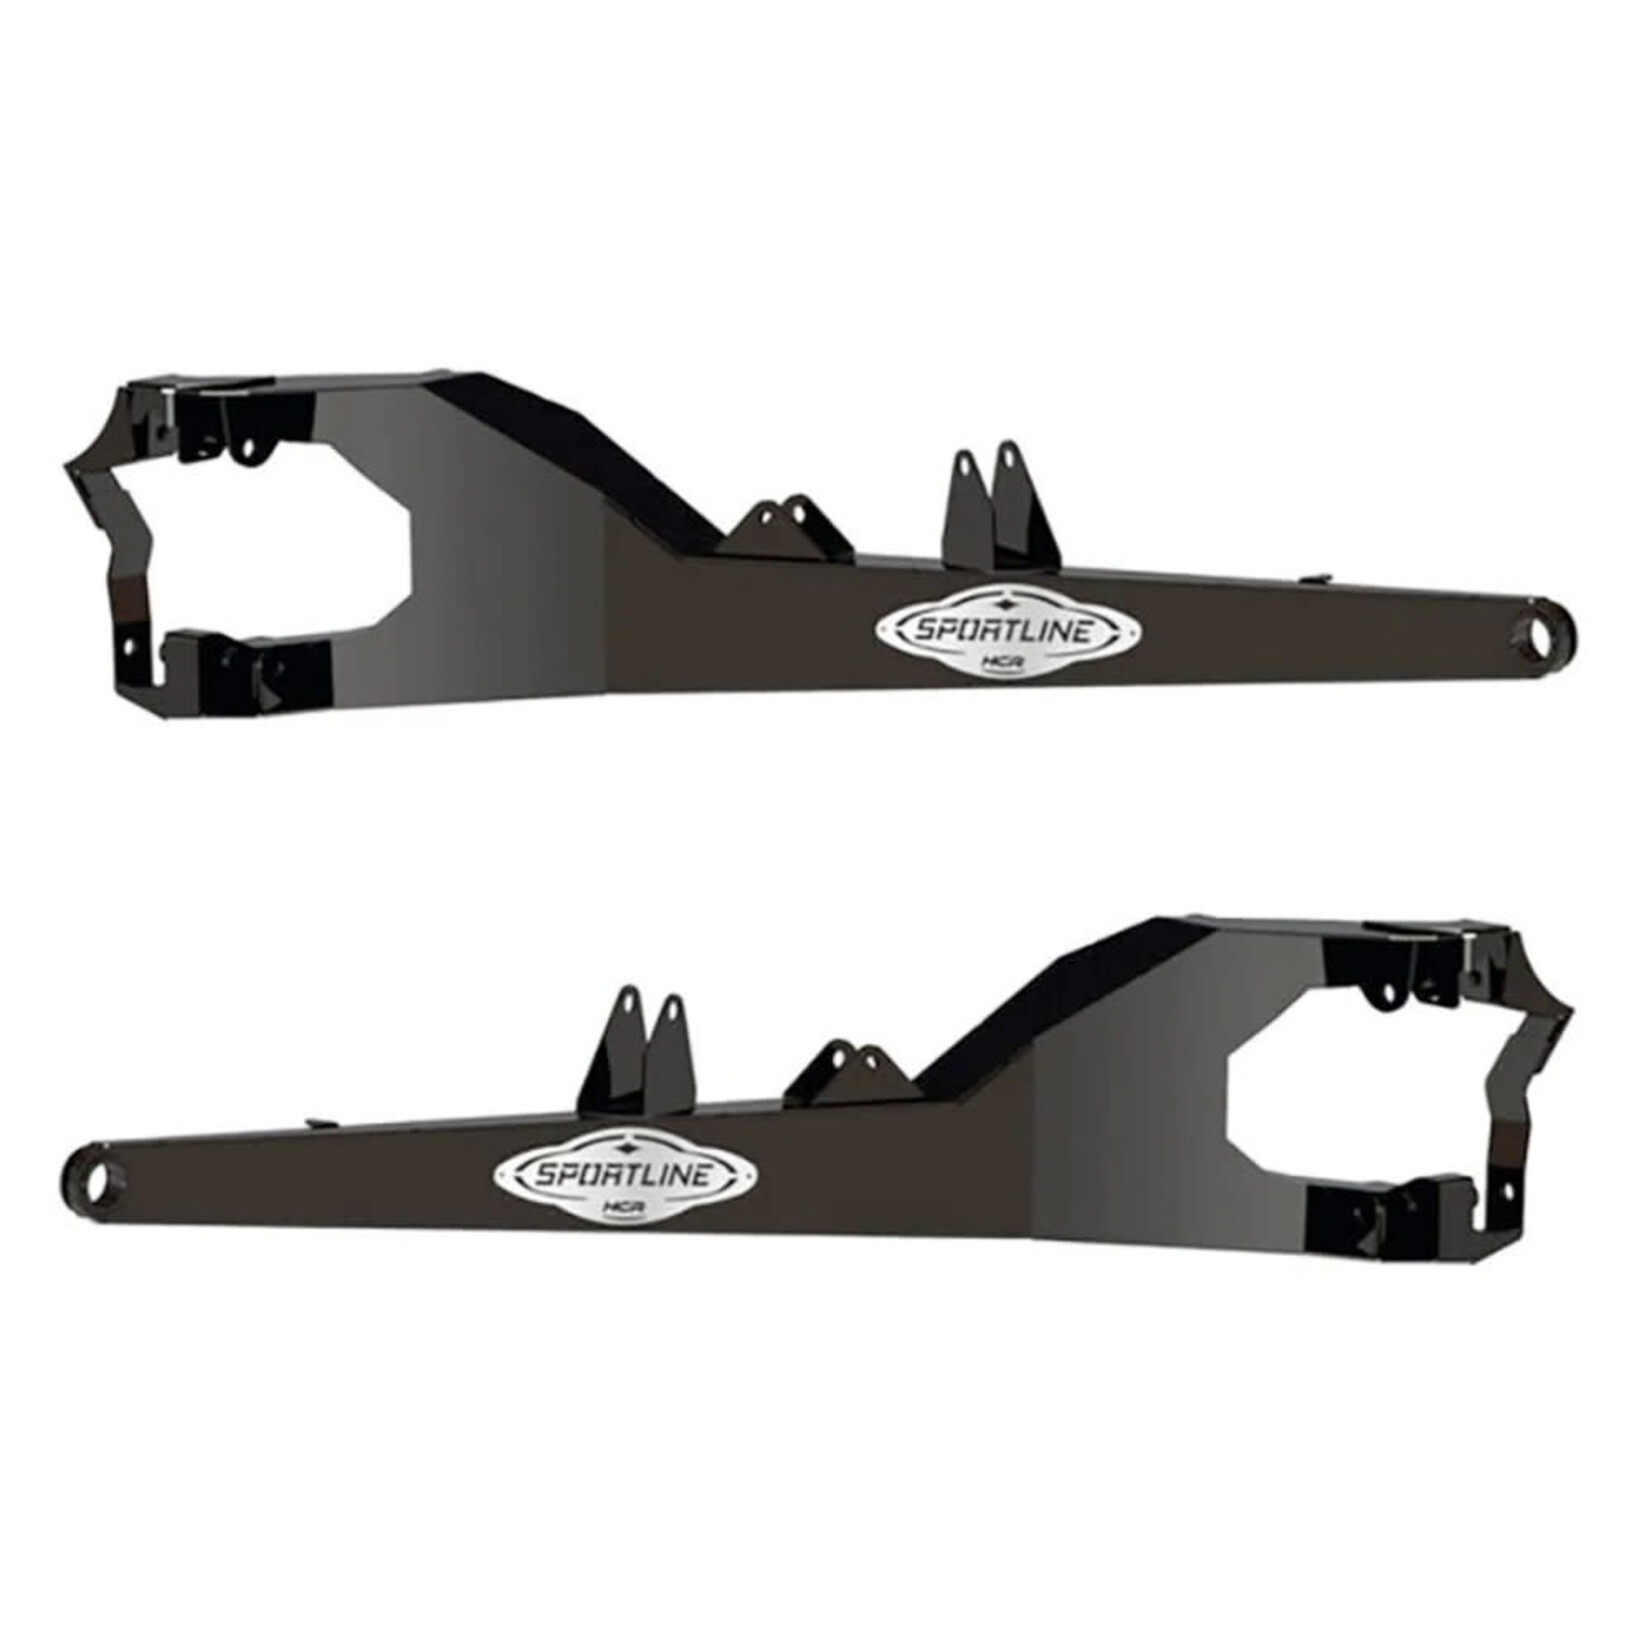 HCR Racing HCR Sportline Trailing Arms for 72" Can-Am Maverick X3